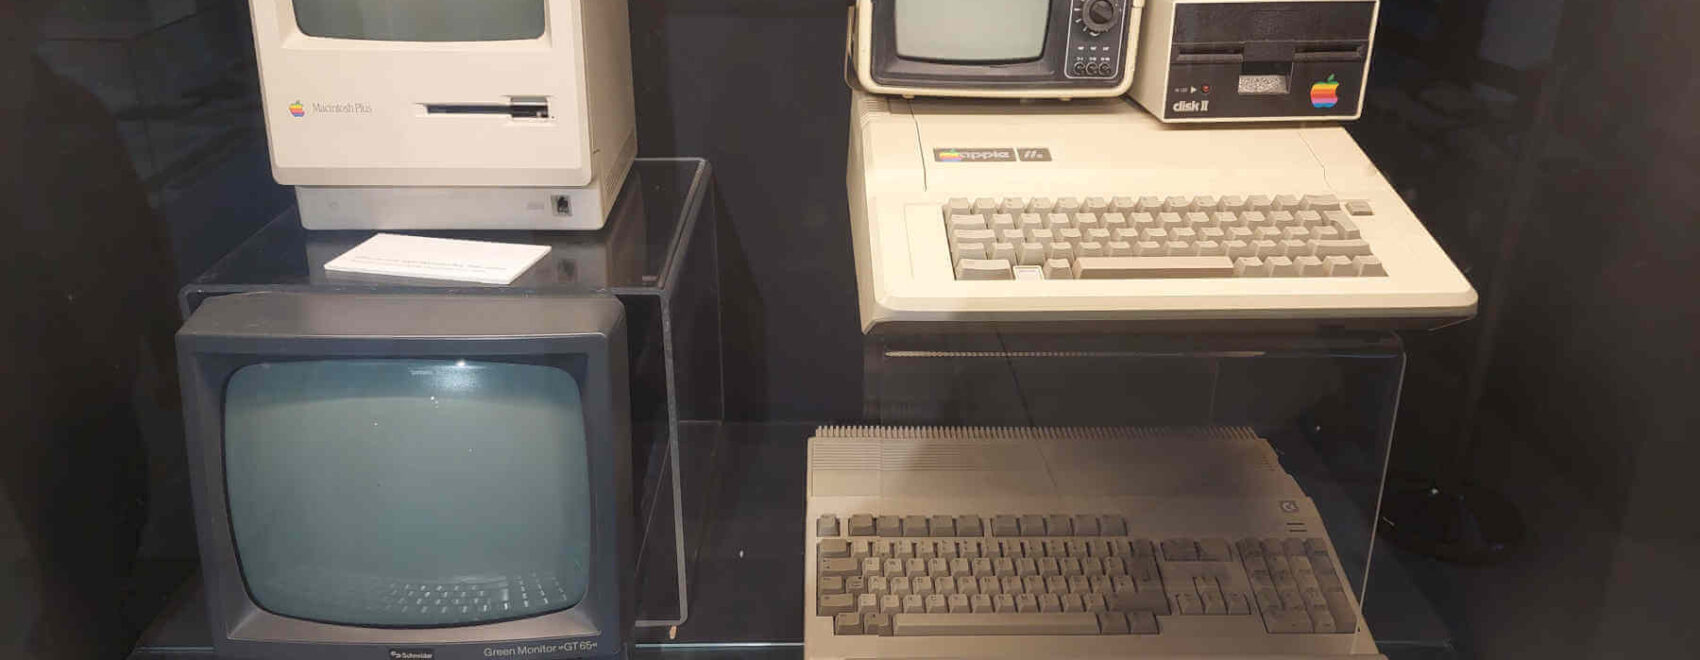 Old computers, including Apple, Museum of Science and Technology Belgrade